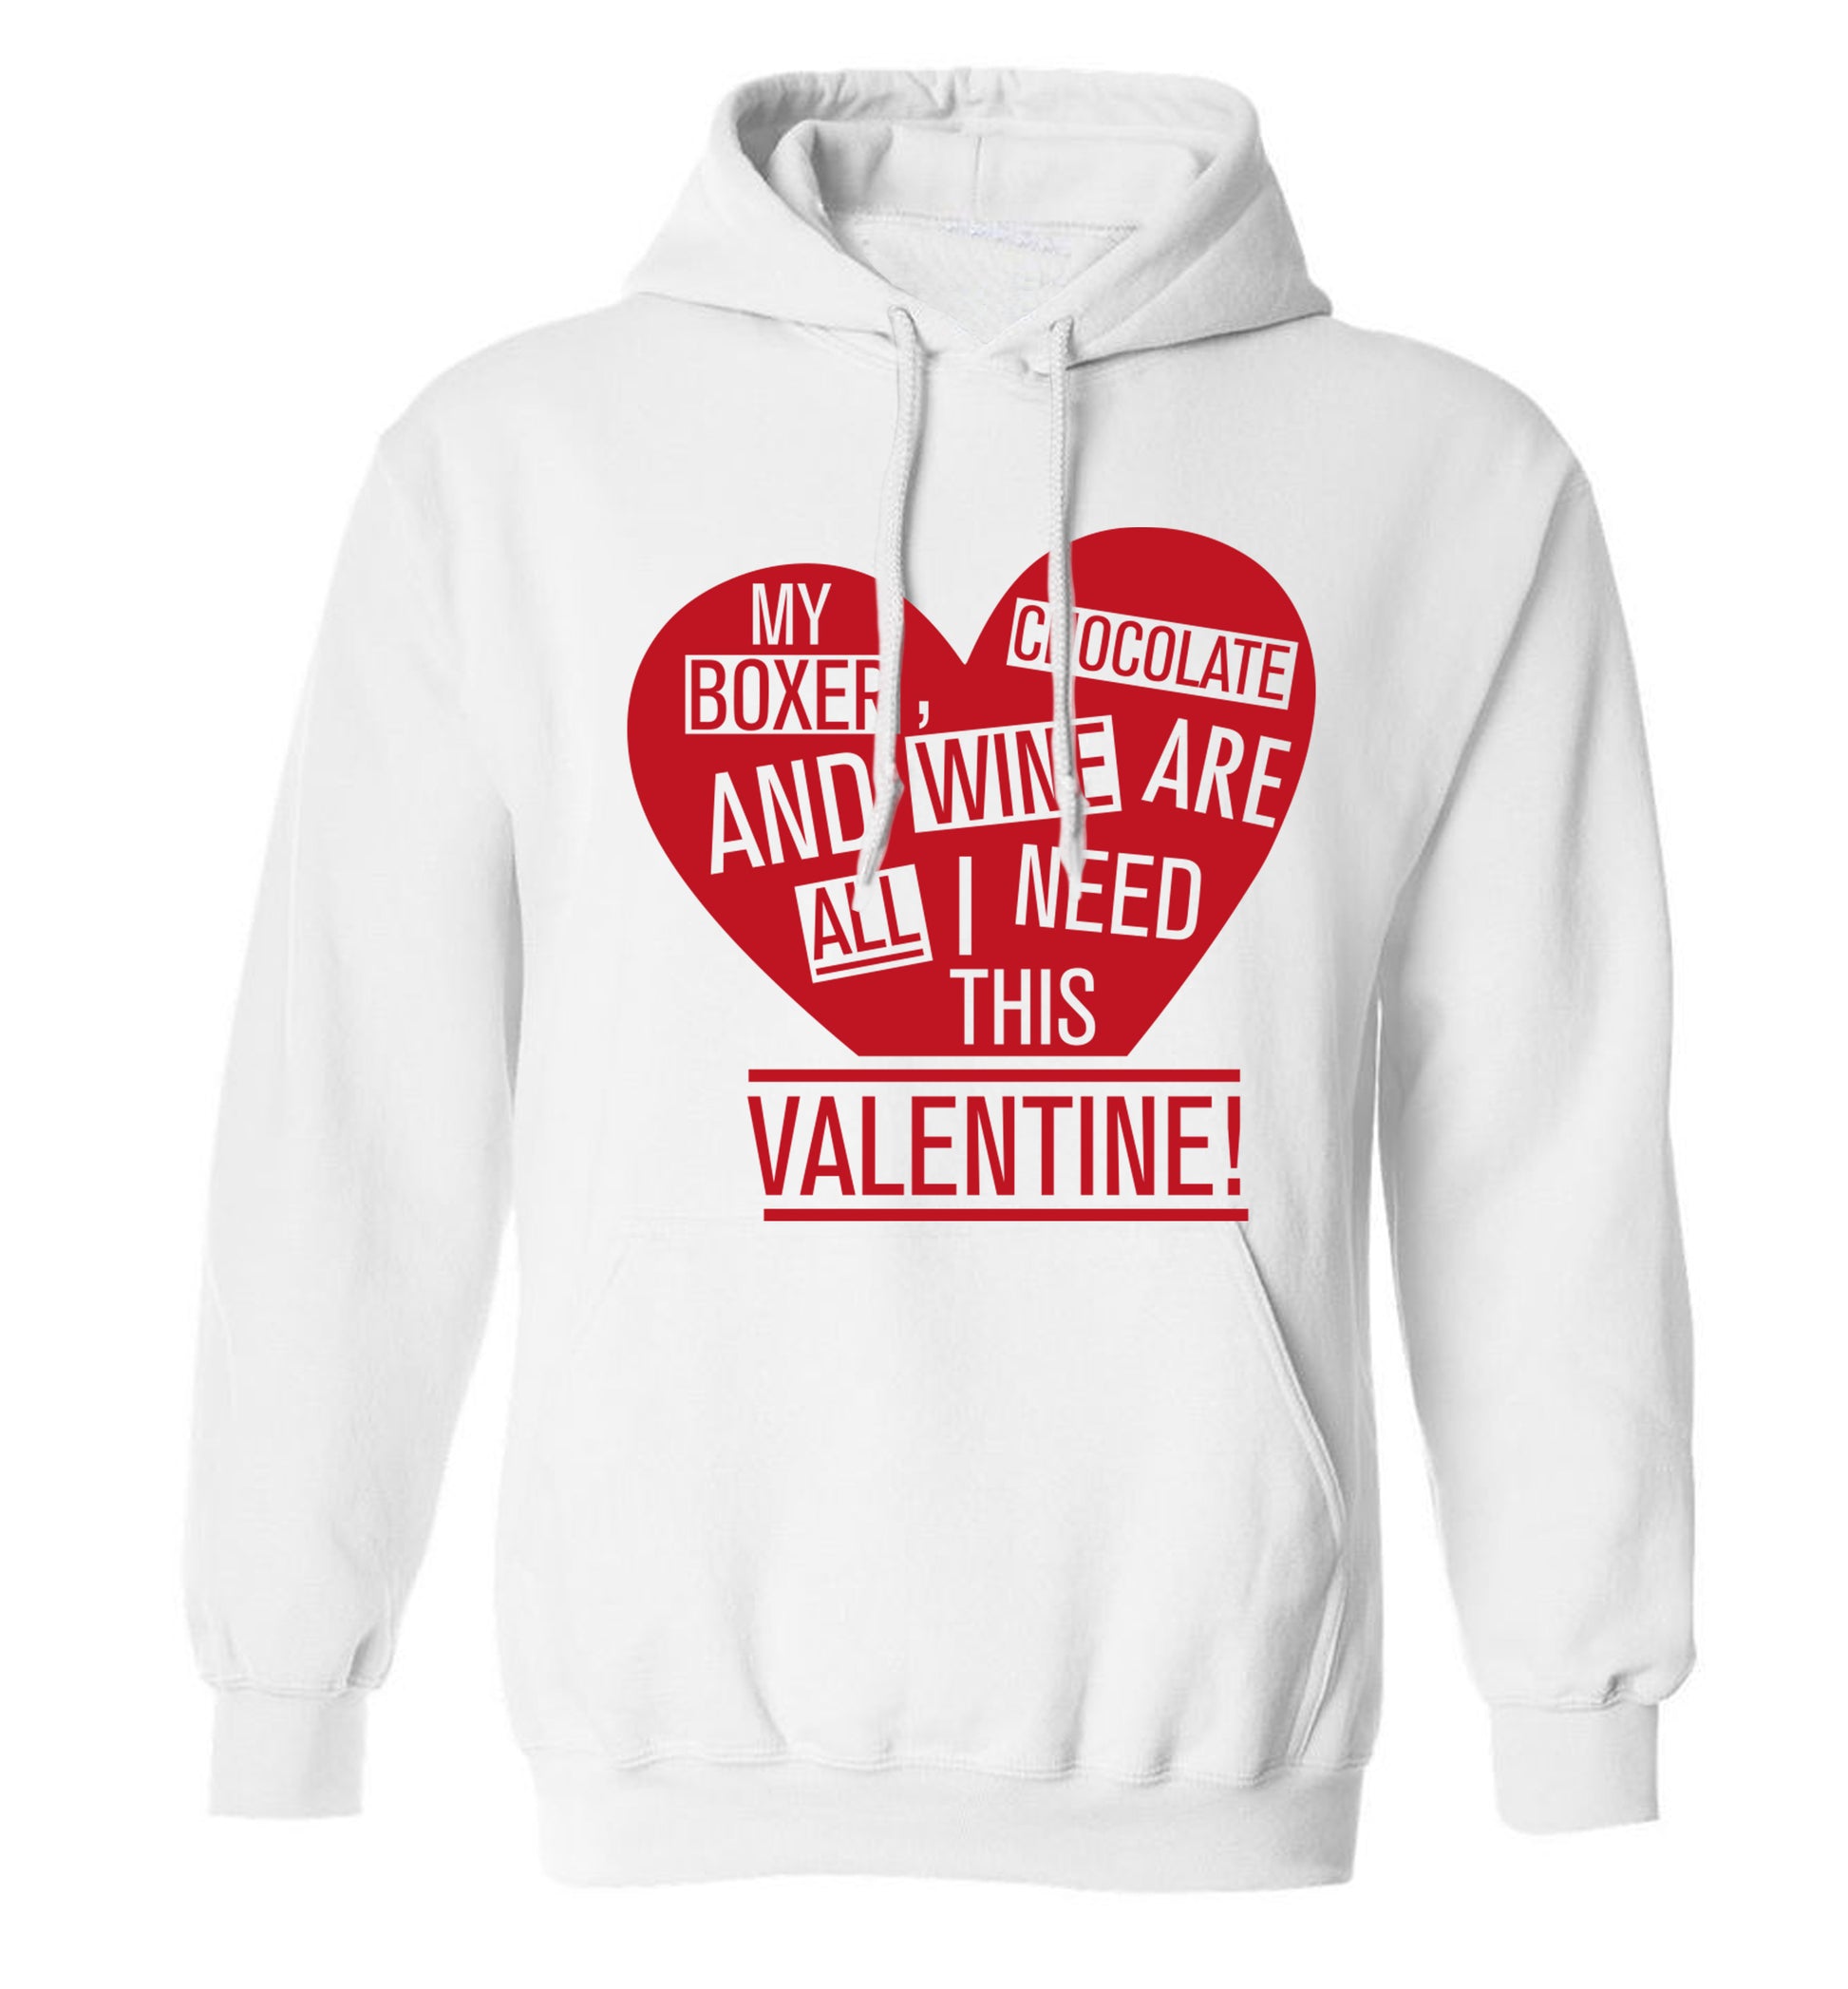 My Boxer, chocolate and wine are all I need this valentine! adults unisex white hoodie 2XL